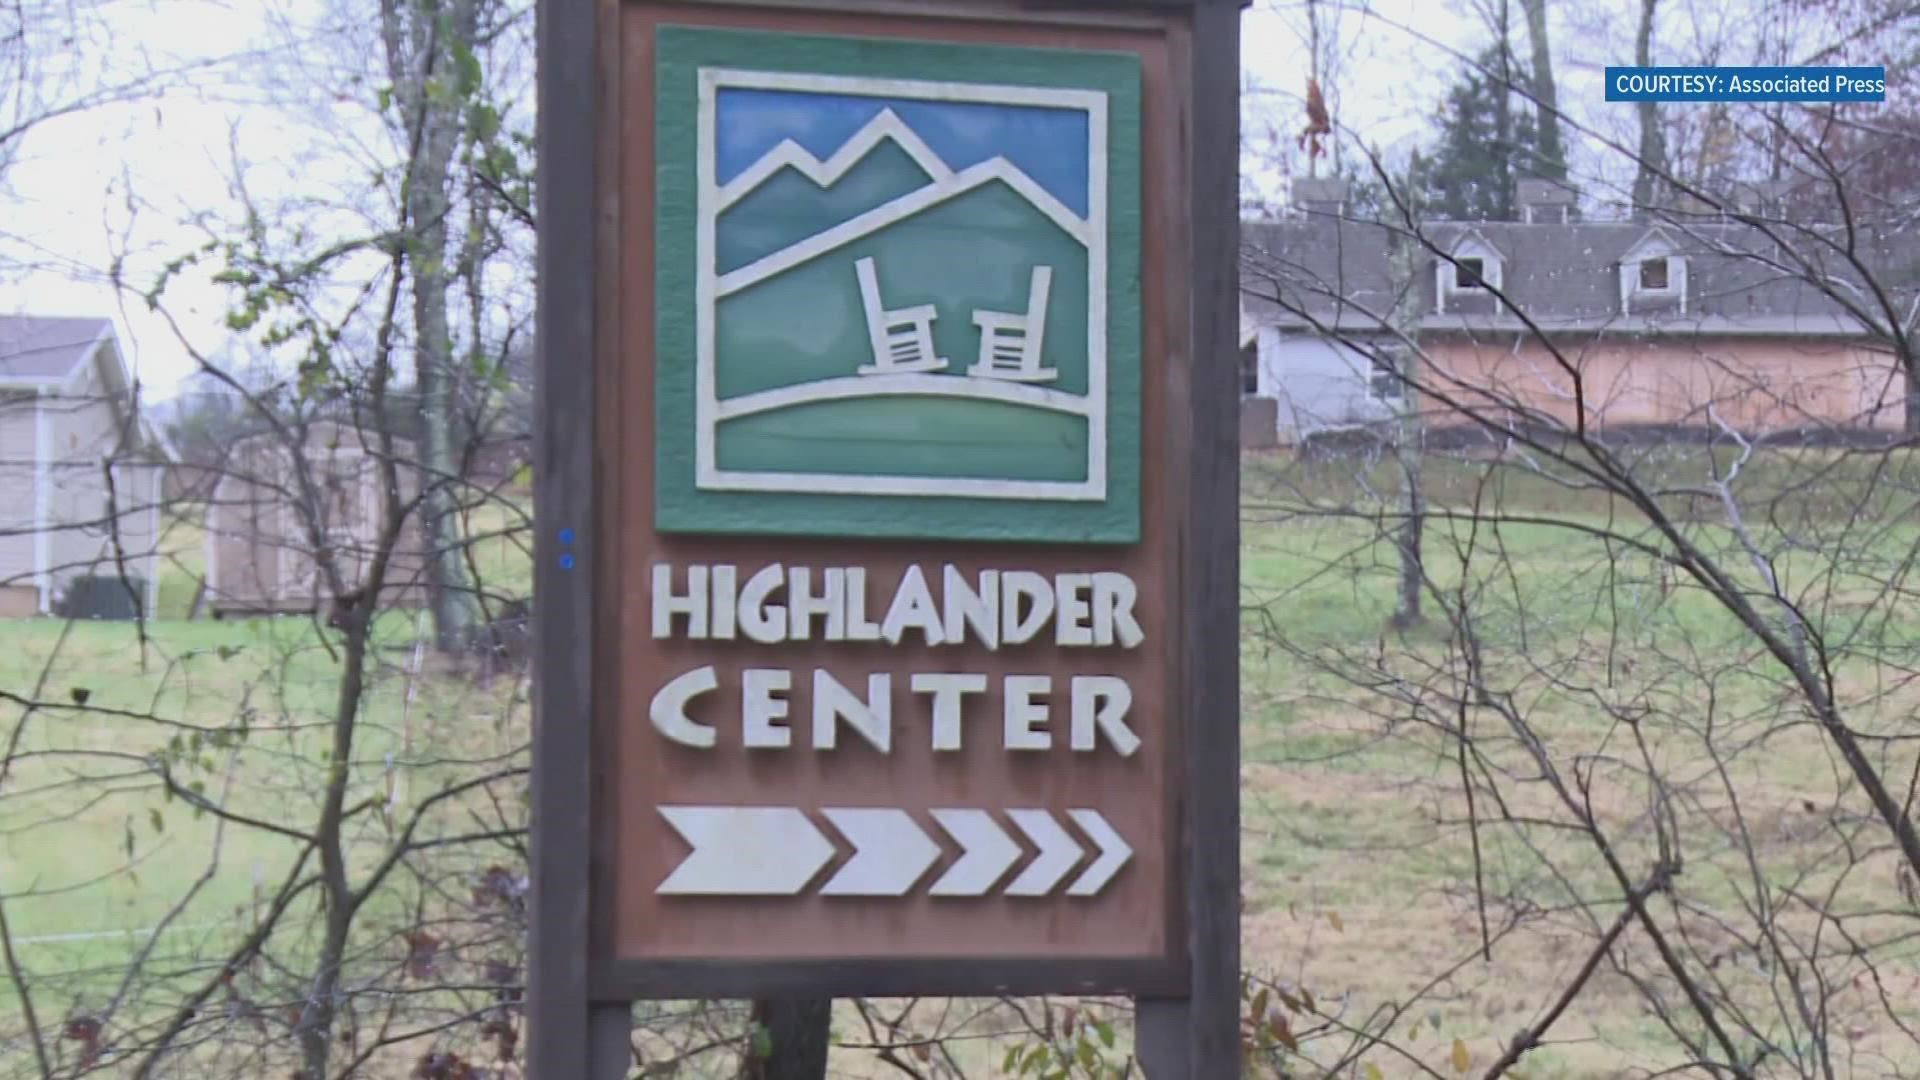 The Highlander Research Education Center is 90 years old this year. It marked a key site in east Tennessee that trained several leaders of the civil rights era.